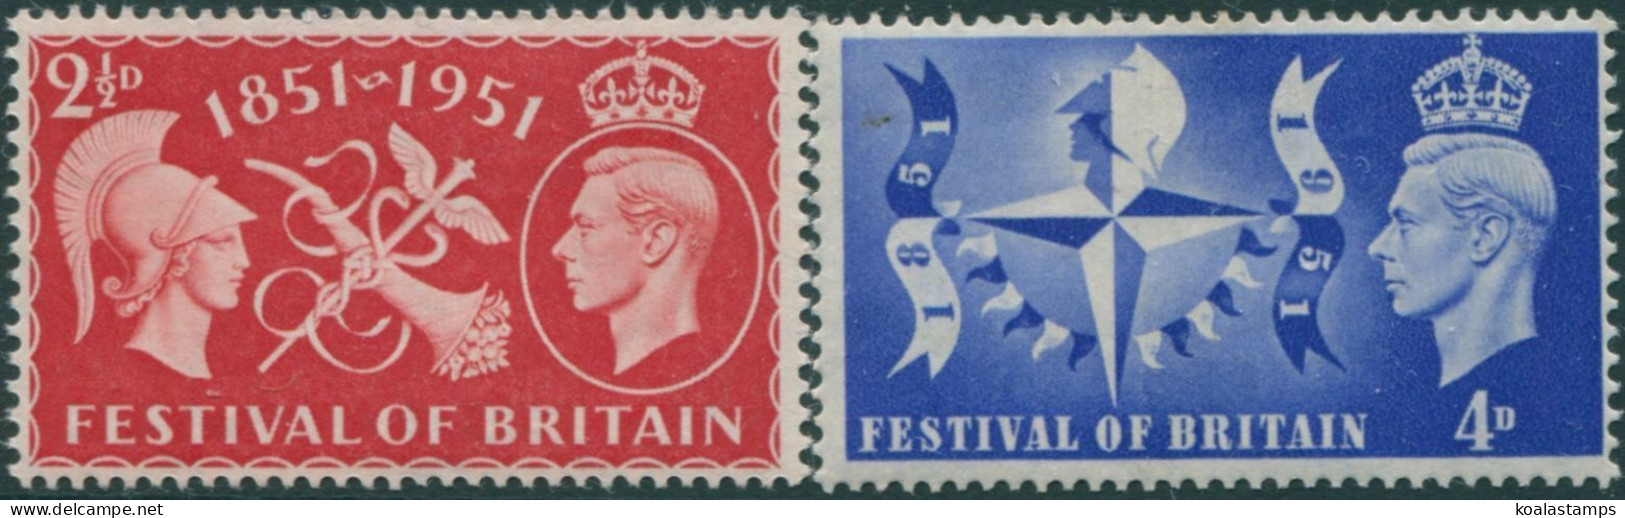 Great Britain 1951 SG513-514 KGVI Festival Set MNH - Unclassified